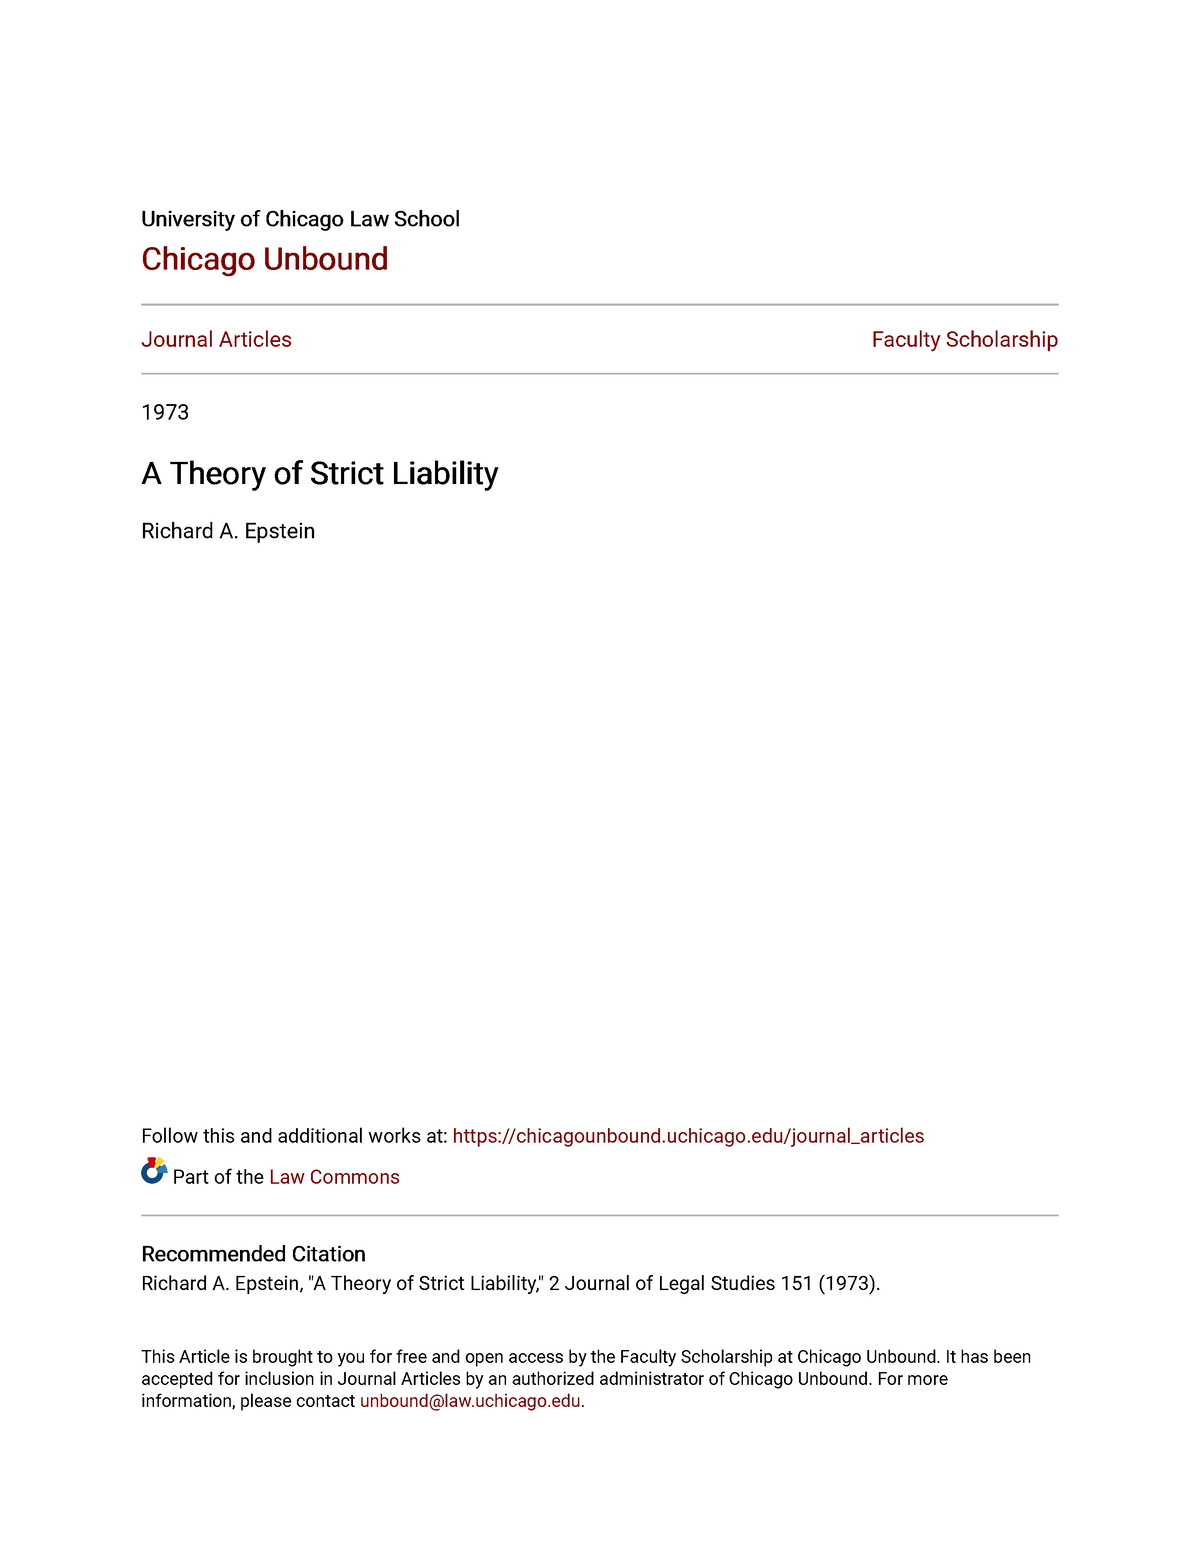 A Theory of Strict Liability University of Chicago Law